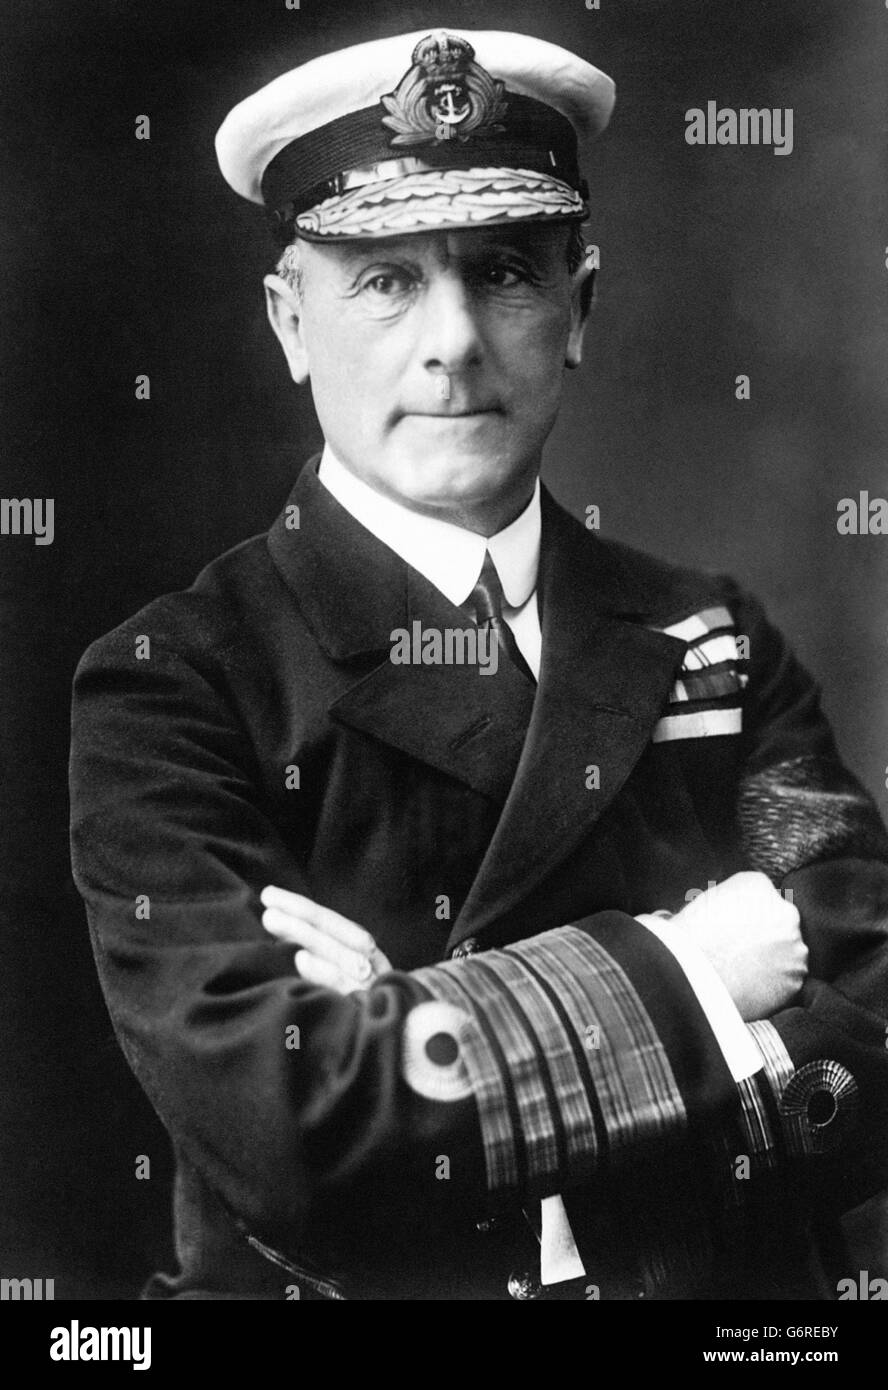 Admiral Sir John Jellicoe, now Lord Jellicoe, was appointed First Sea Lord in November 1916, and turned over command of the Grand Fleet to Admiral David Beatty. Stock Photo